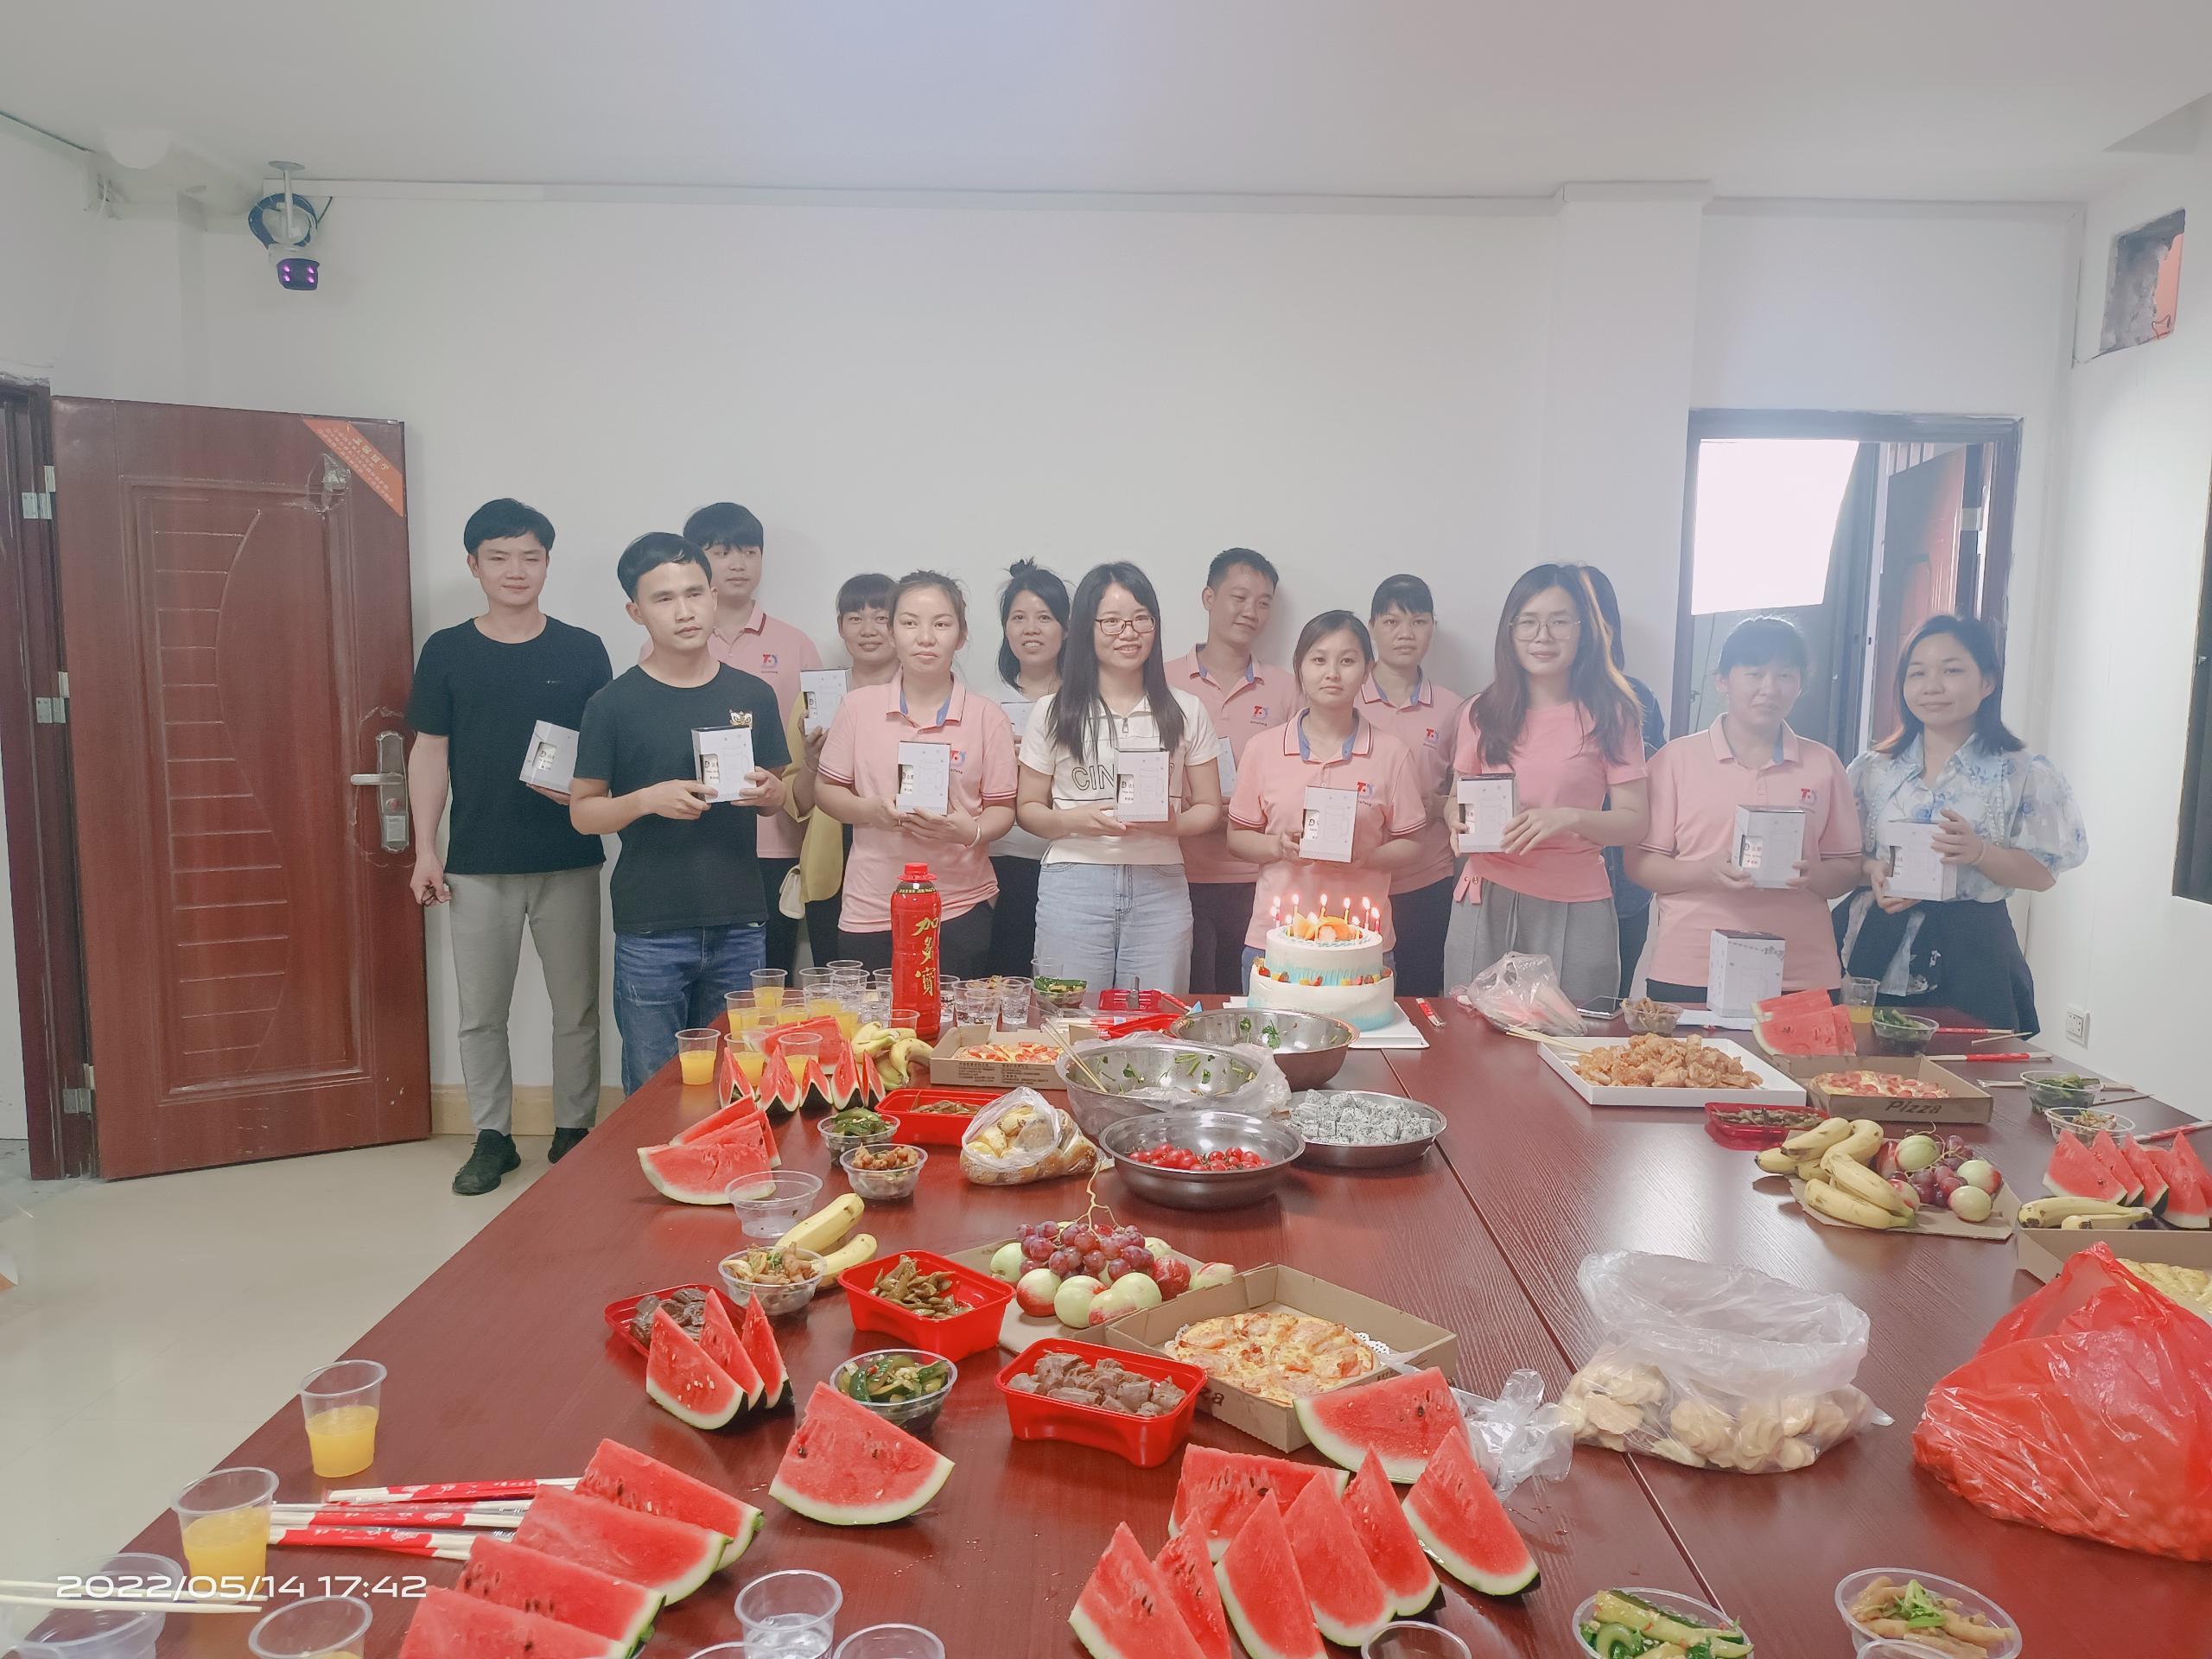 Dataifeng birthday party, Happy birthday to to them!!